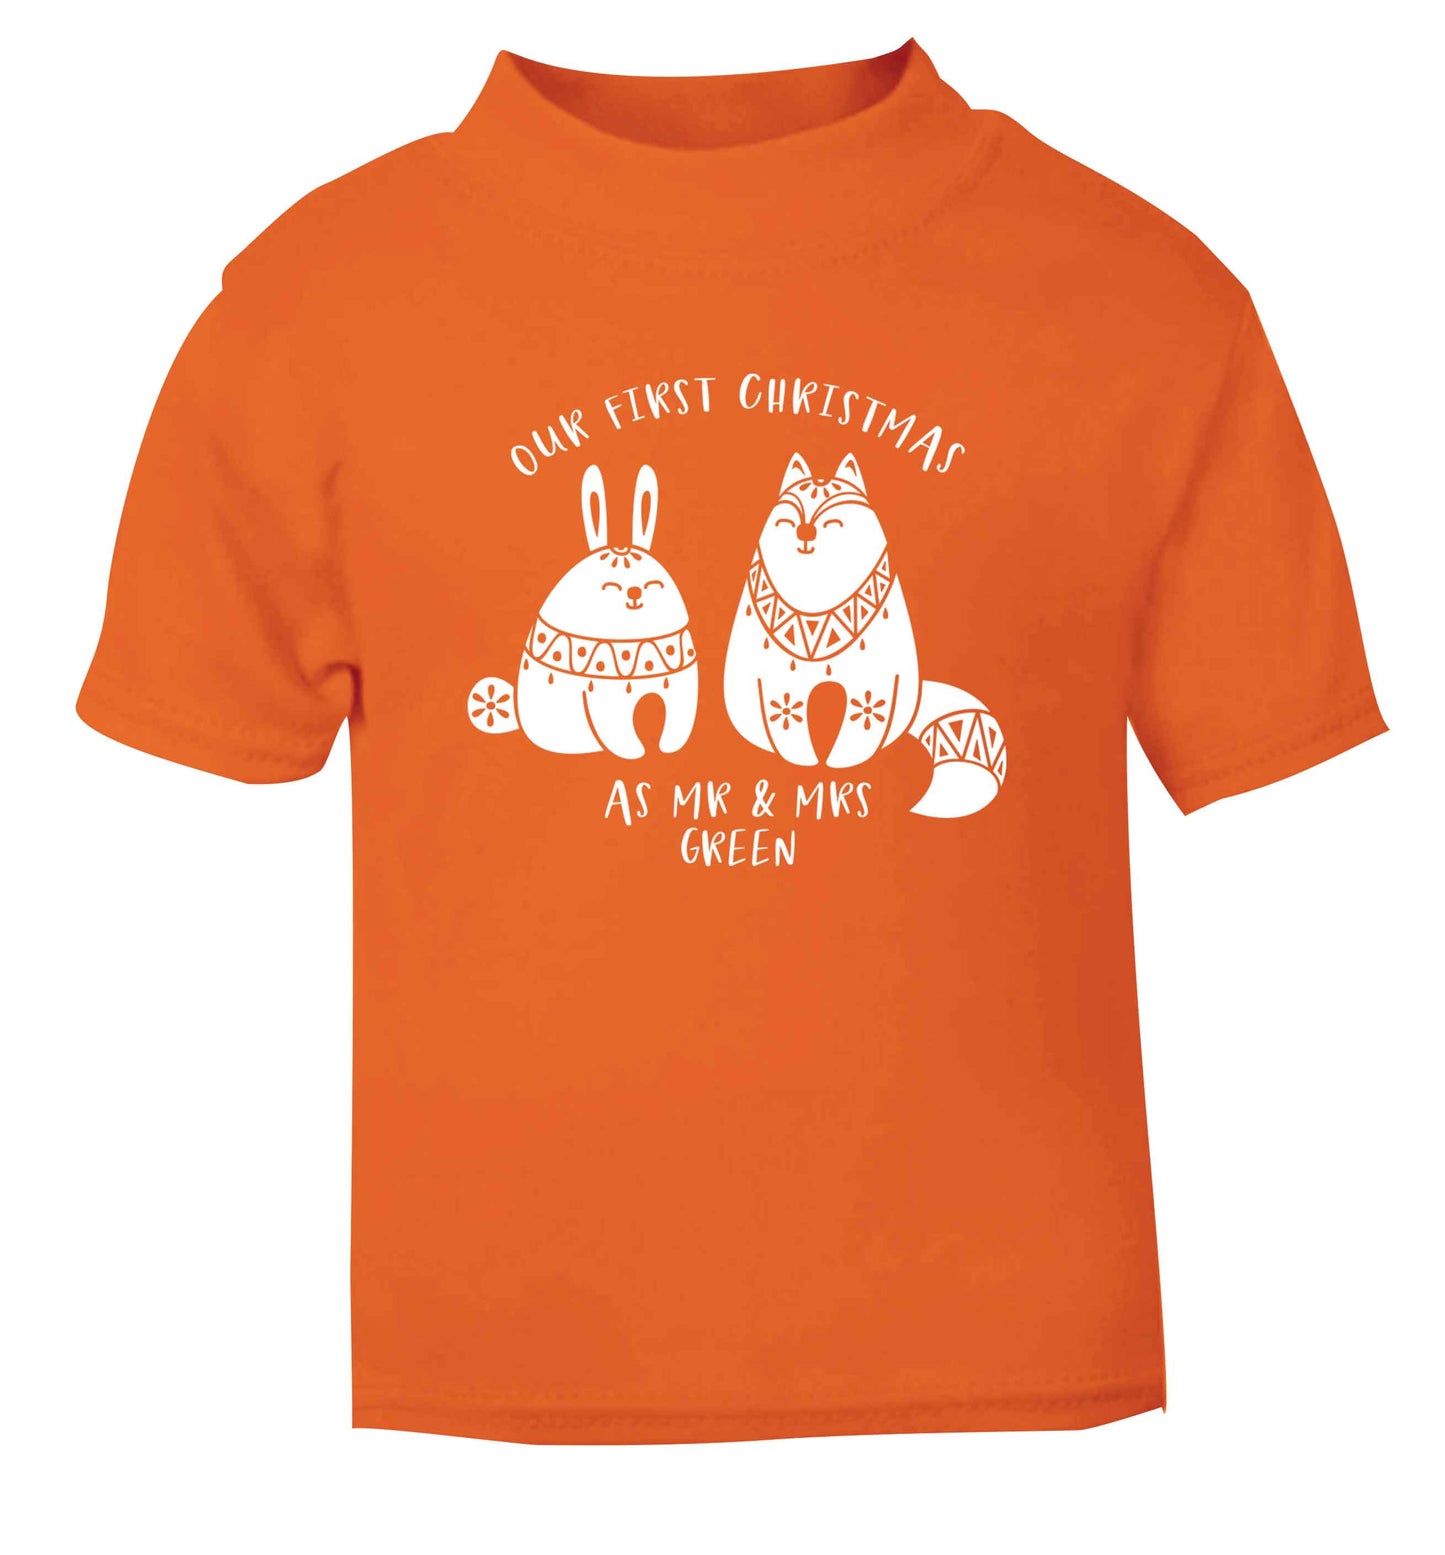 Our first Christmas as Mr & Mrs personalised orange Baby Toddler Tshirt 2 Years